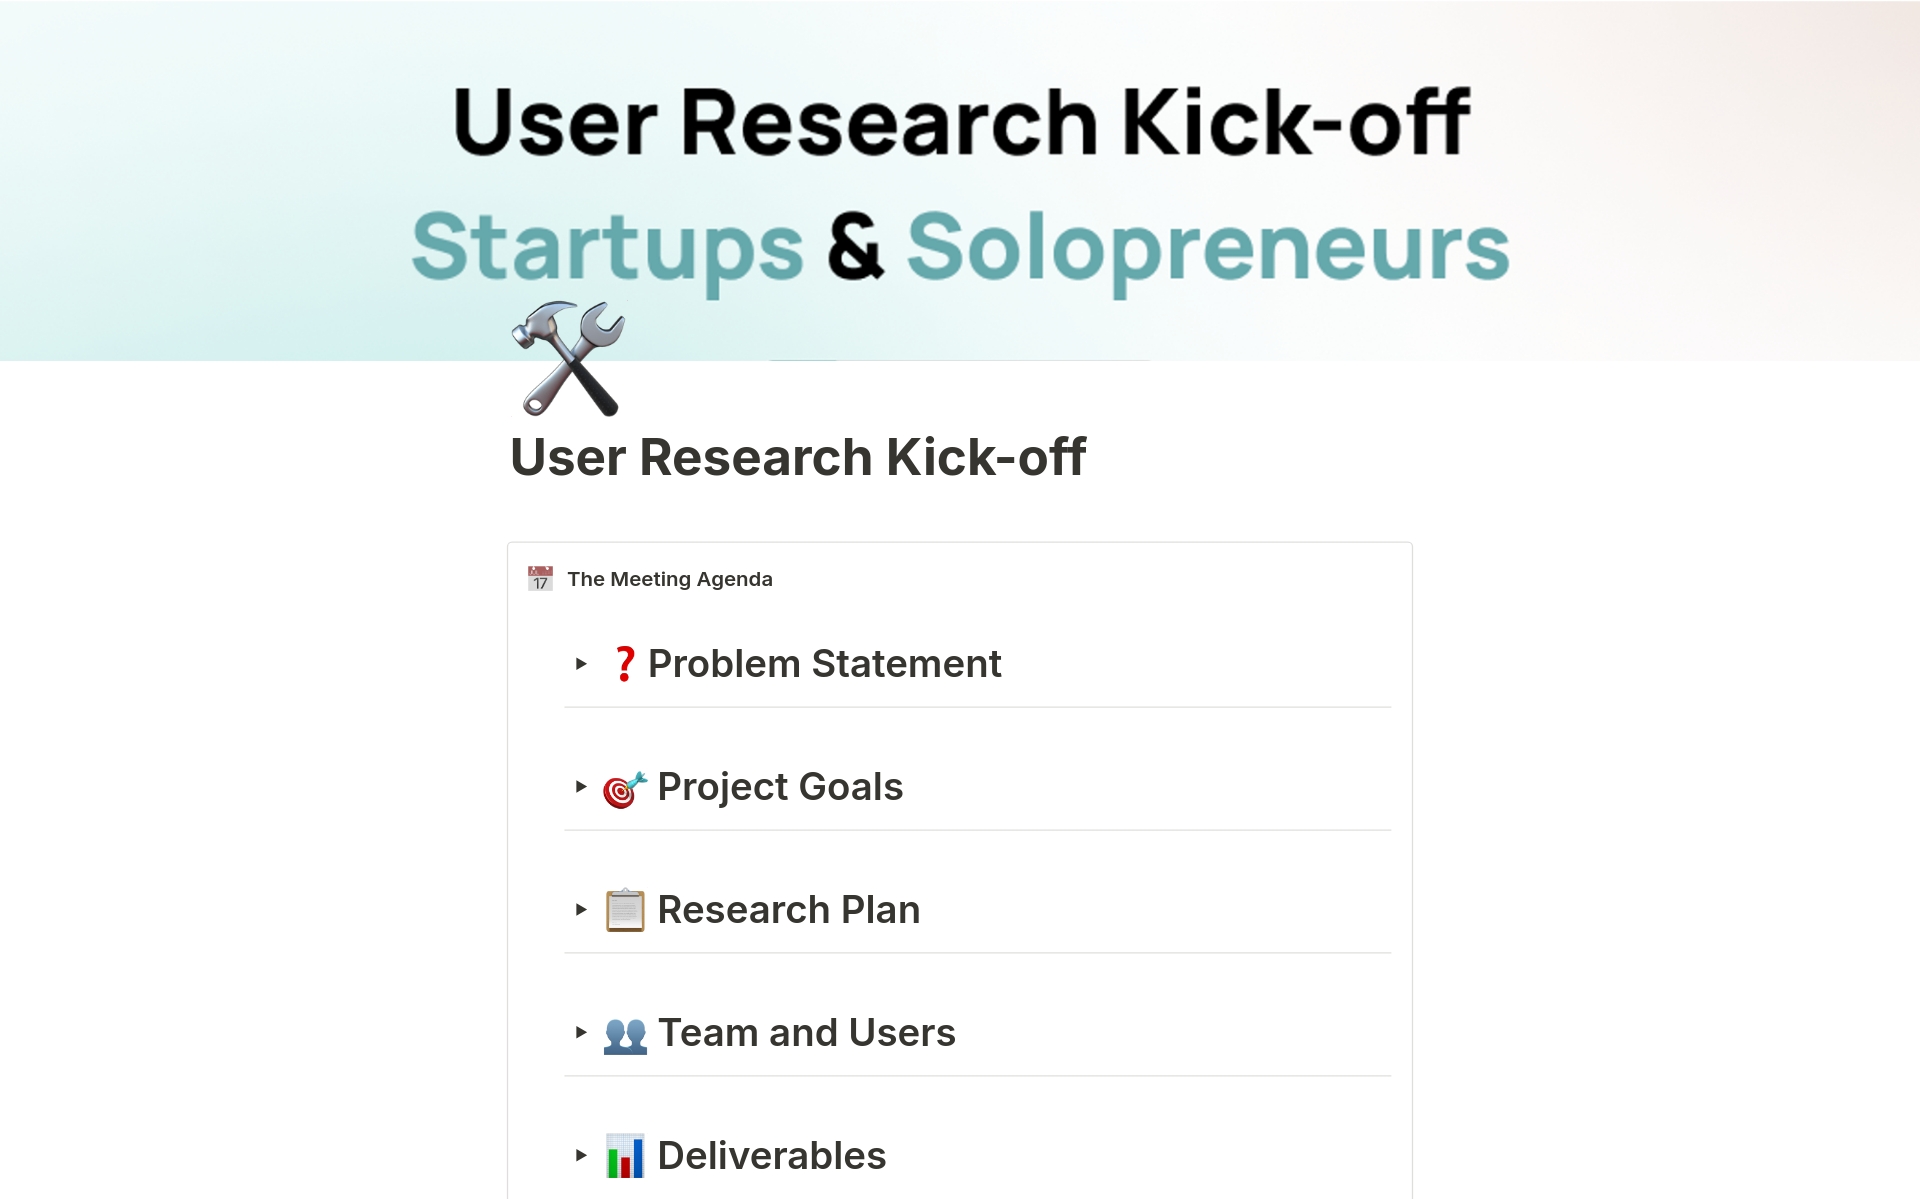 User Research Kick-off for Startups & Solo Prosのテンプレートのプレビュー